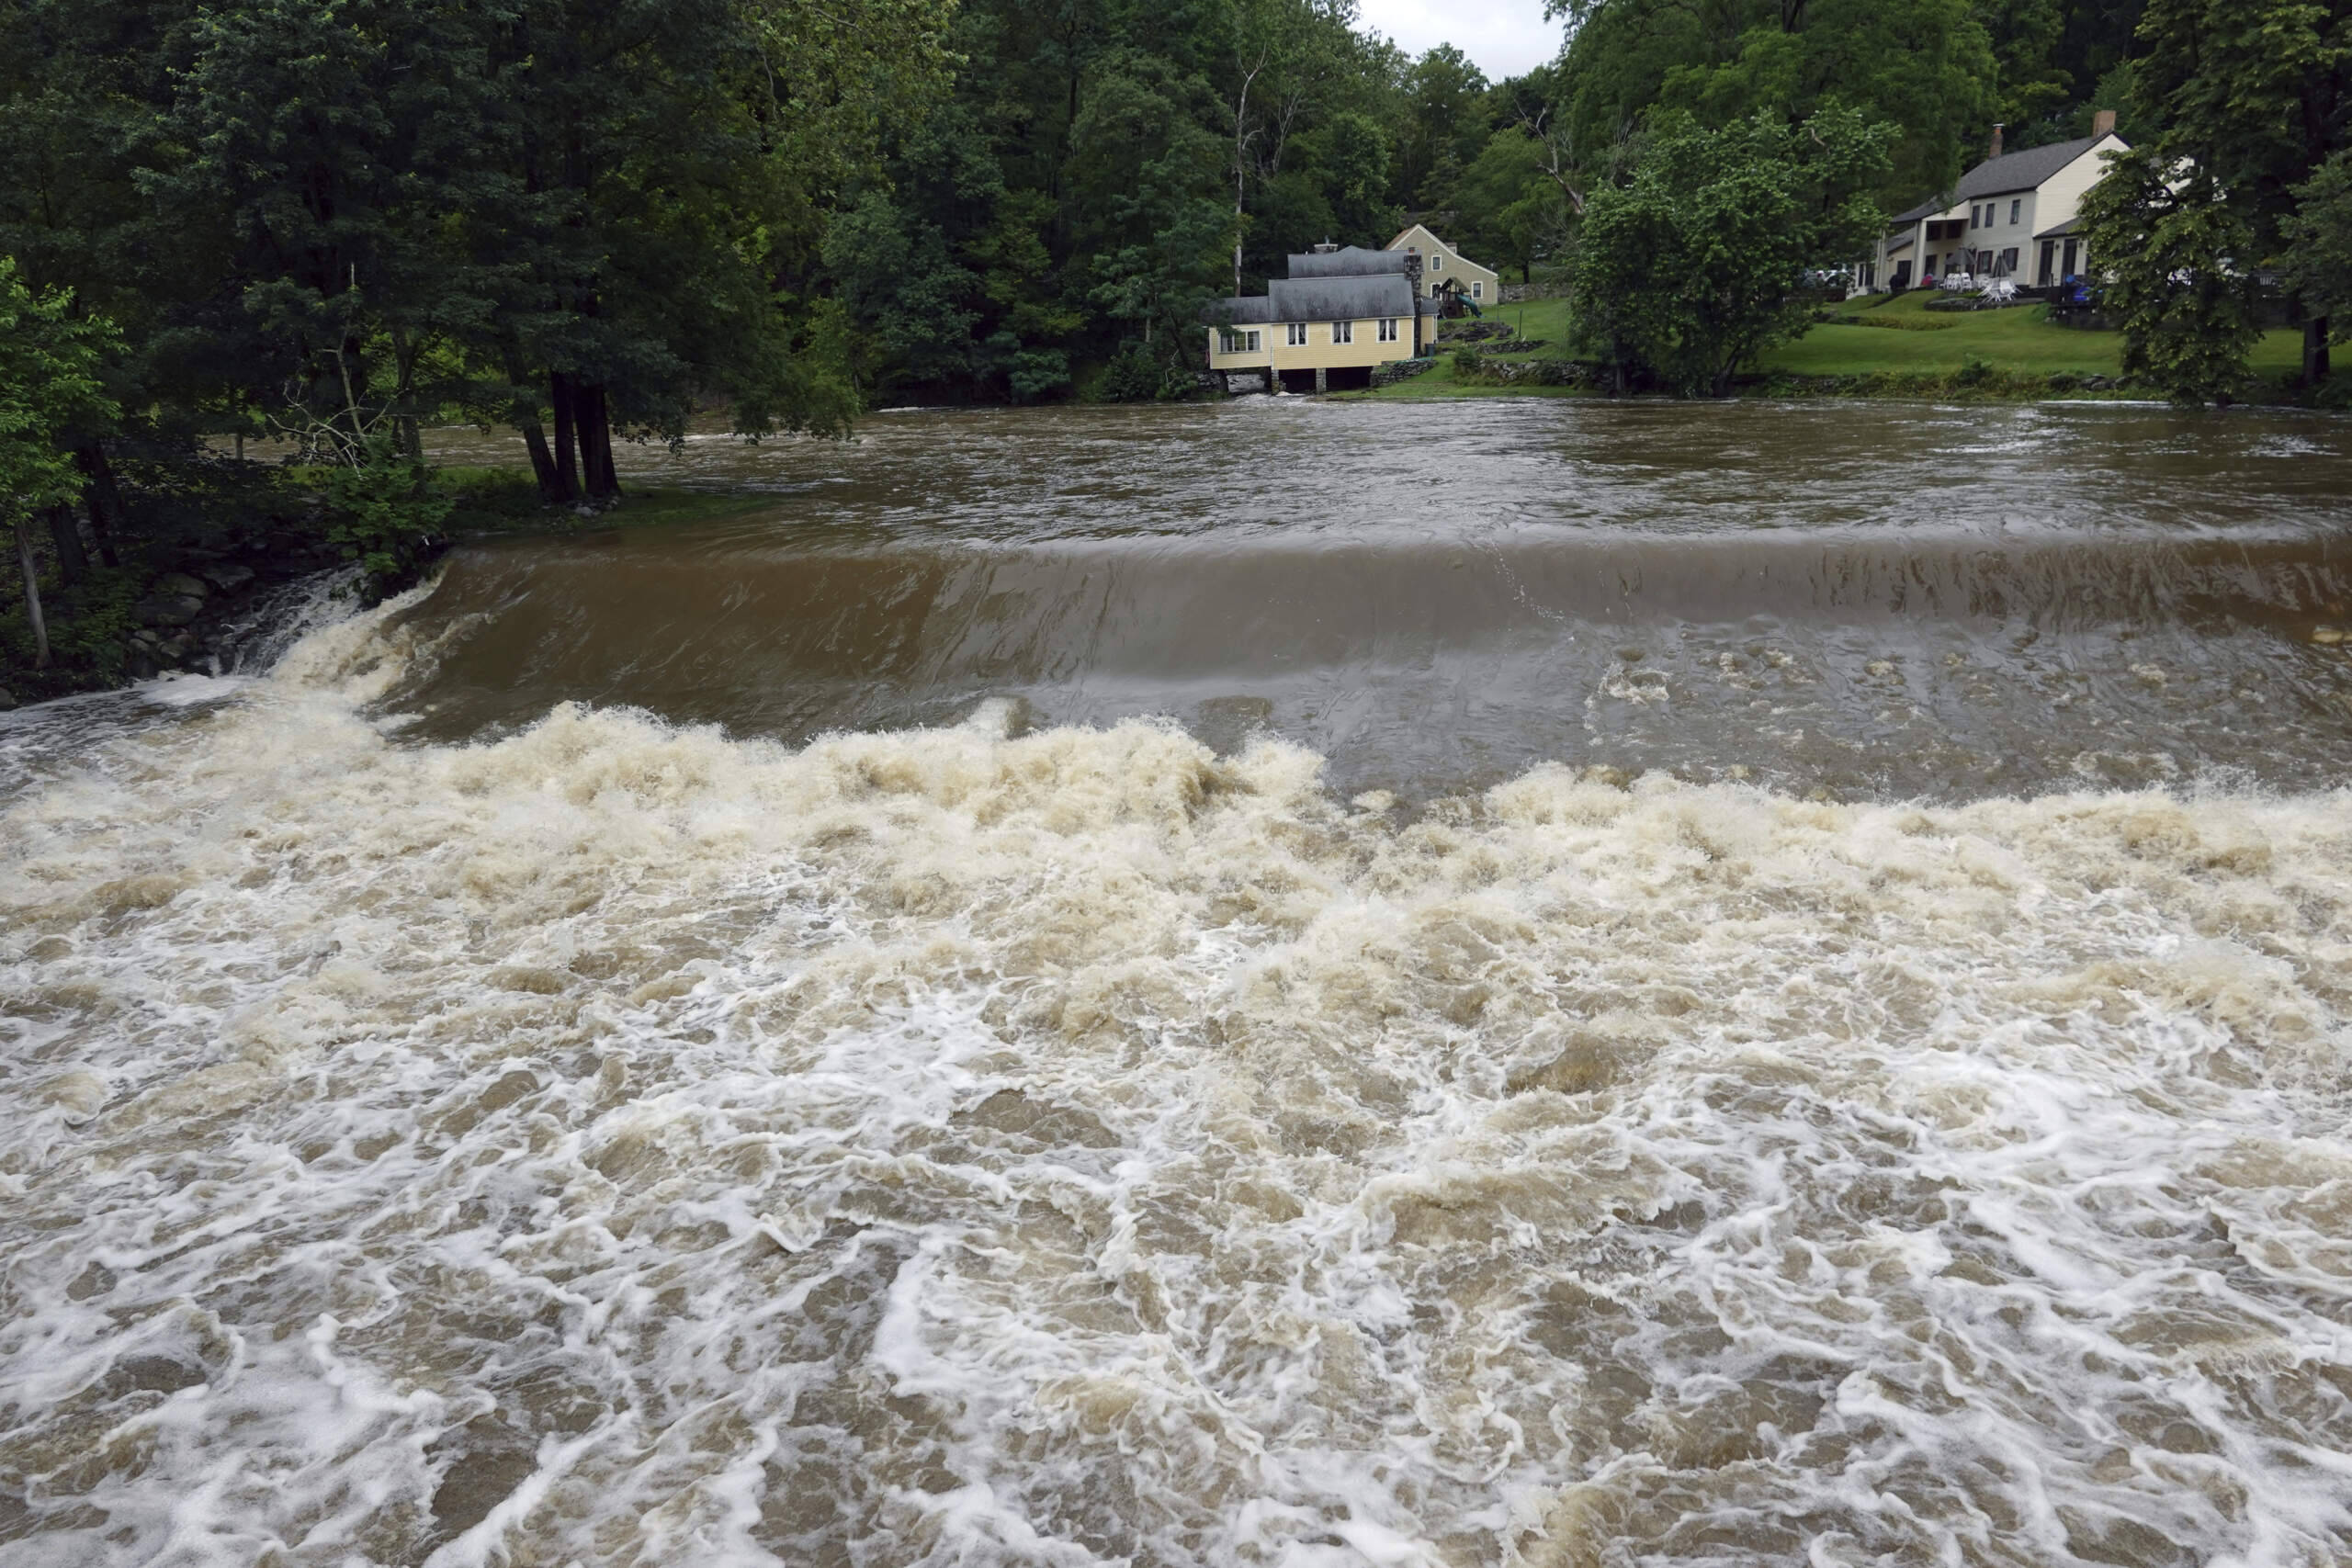 The Moodna Creek flows through Cornwall, a town in New York's Hudson Valley, during the storm, July 10, 2023. (Paul Kazdan/AP)